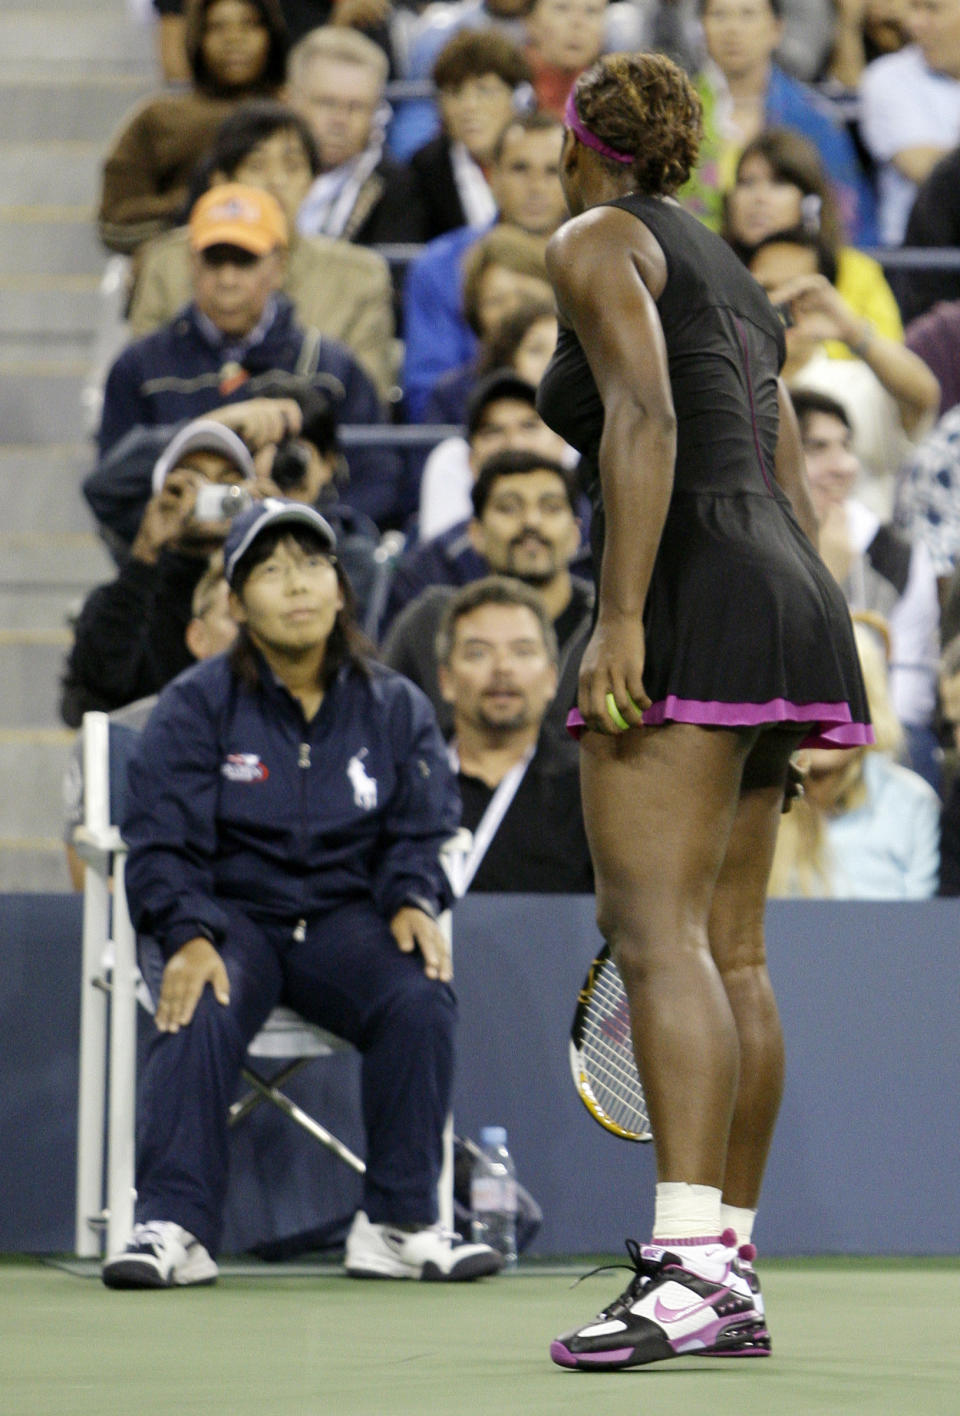 FILE - In this Saturday, Sept. 12, 2009, file photo Serena Williams, of the United States, argues with line judge Shino Tsurubuchi over a foot fault call during her match against Kim Clijsters, of Belgium, at the U.S. Open tennis tournament in New York. Williams’ dispute with the chair umpire during the 2018 U.S. Open final is the latest issue she’s had with match officials at the Grand Slam tournament. (AP Photo/Darron Cummings, File)